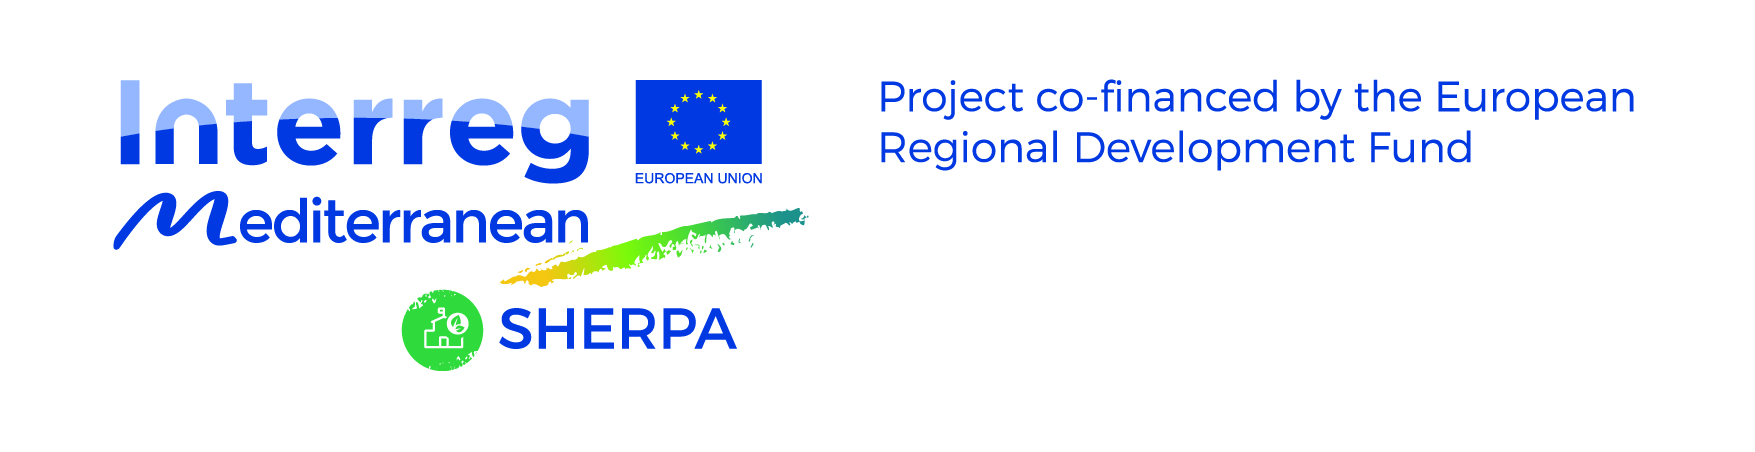 SHERPA_Observer Pack: Shared knowledge for Energy renovation in buildings by Public Administrations